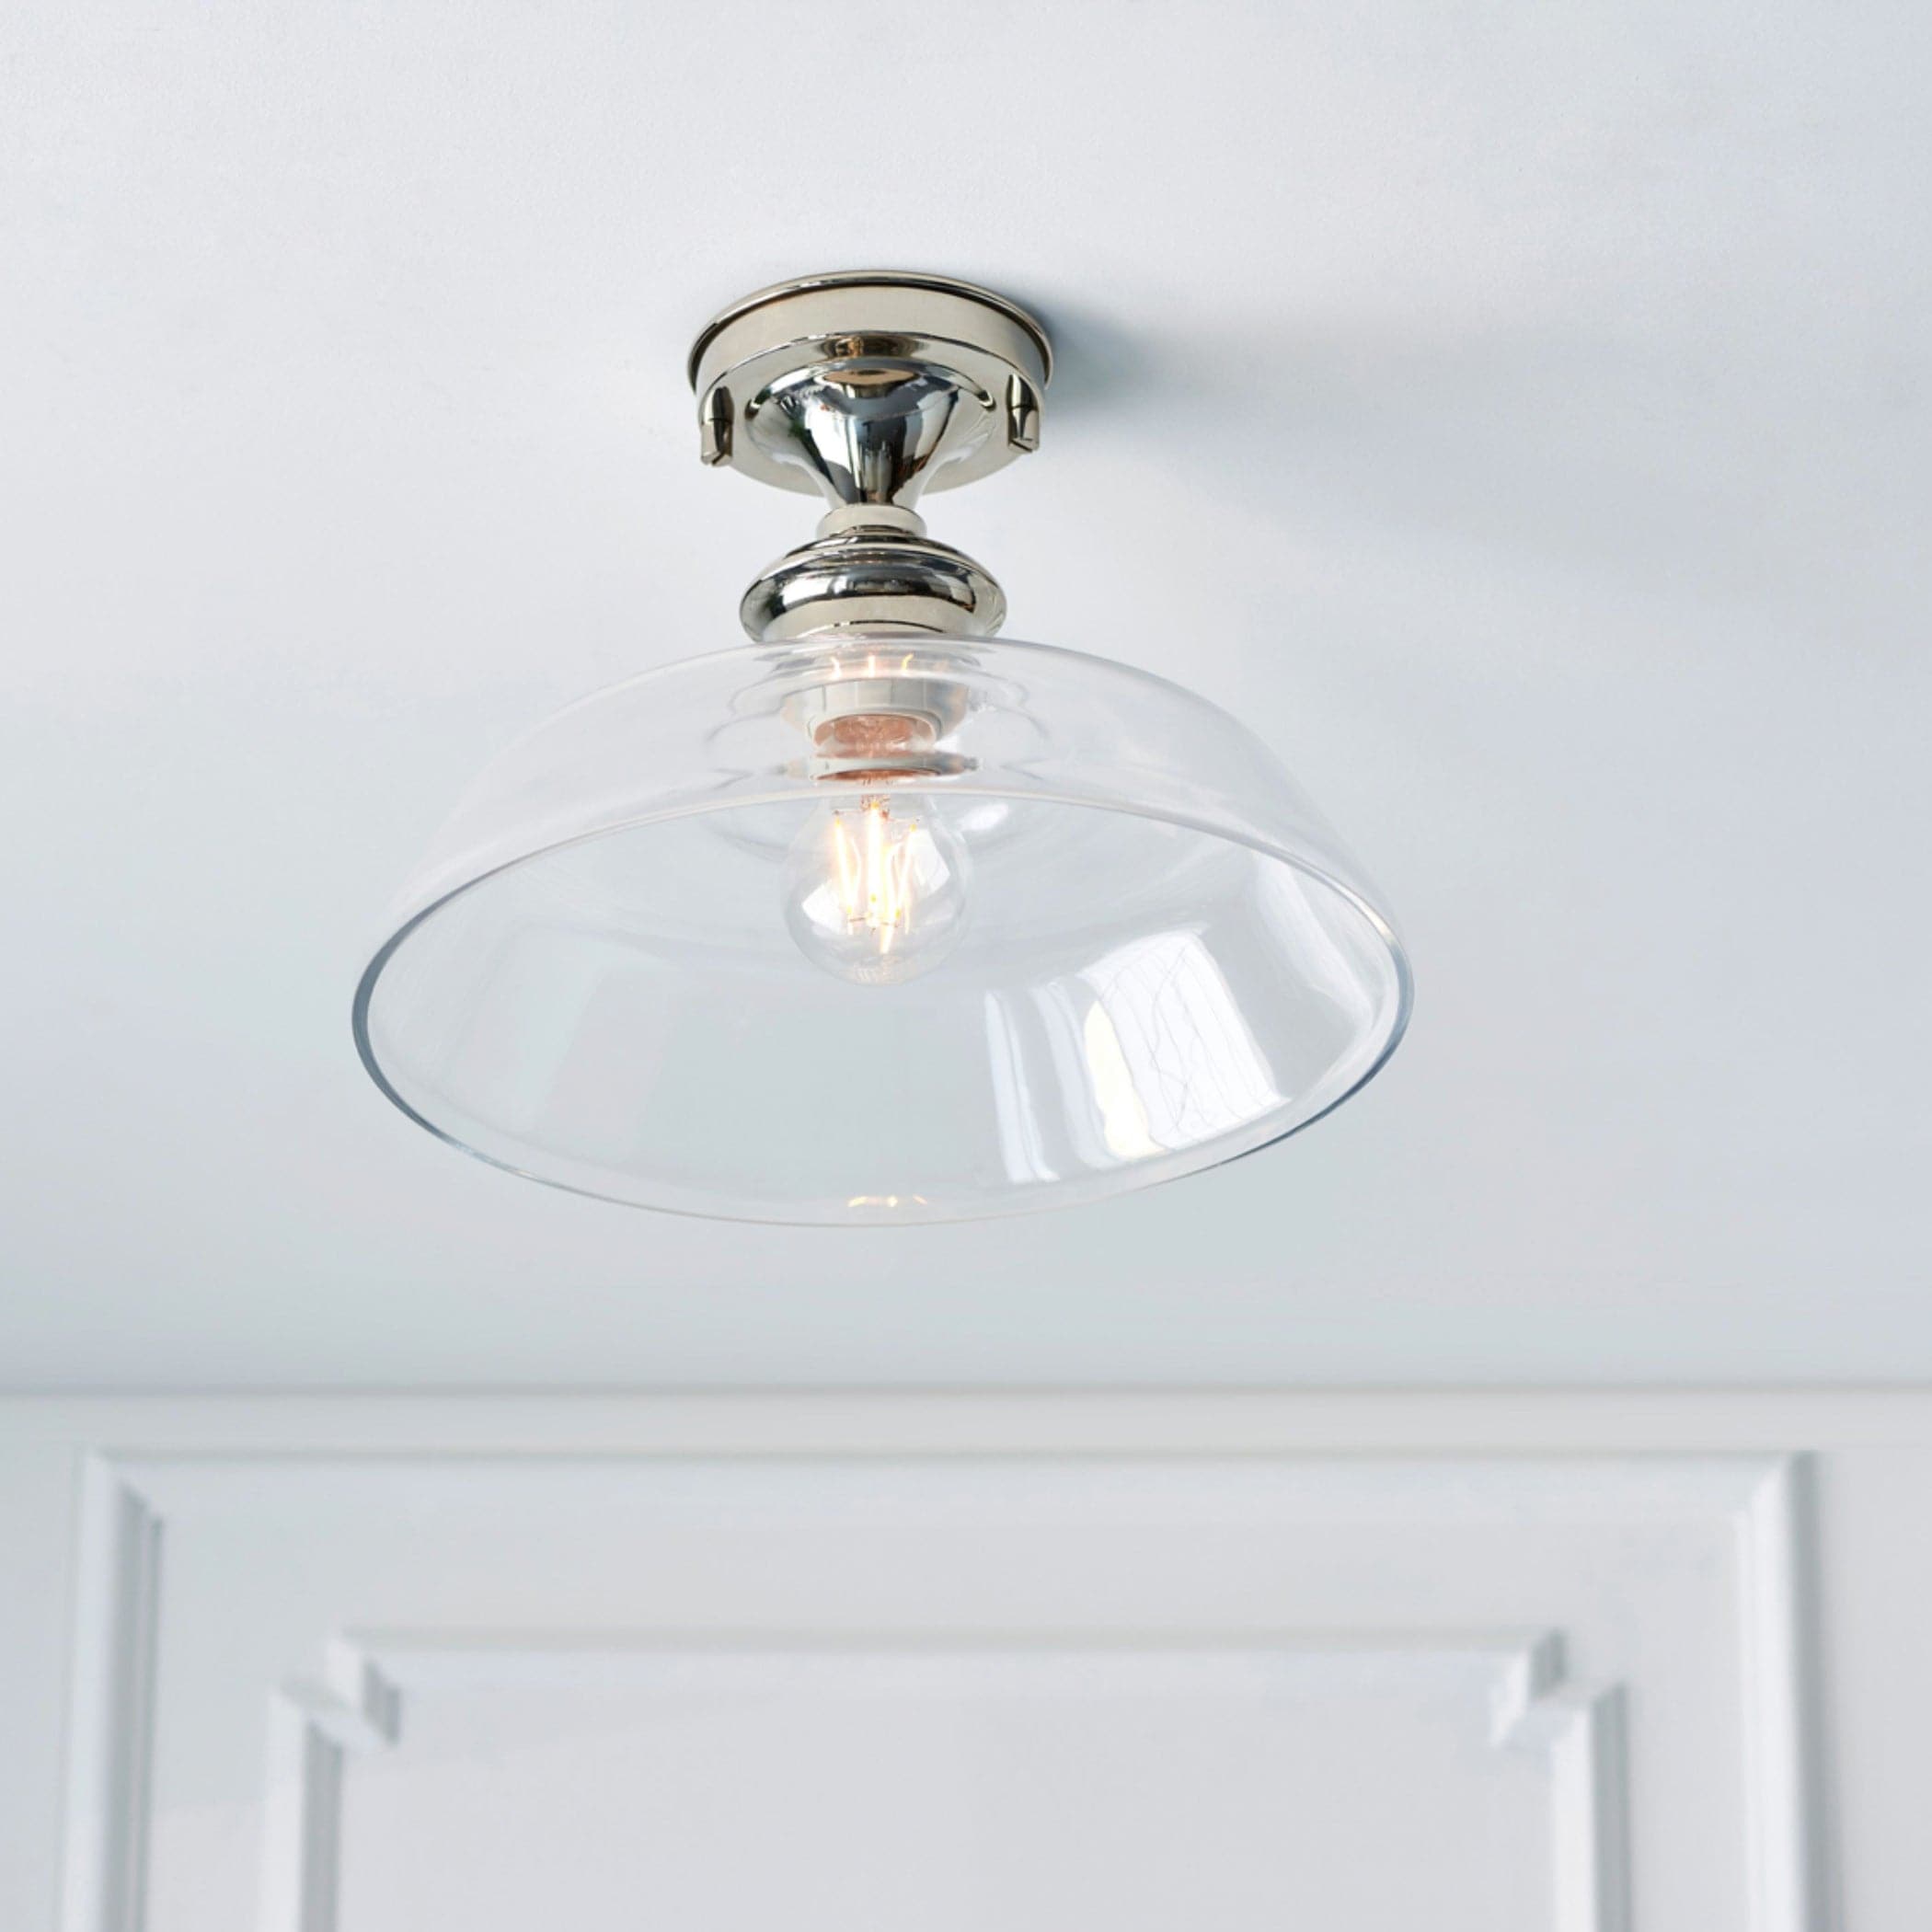 Nickel and Glass Dorset Ceiling Light 3